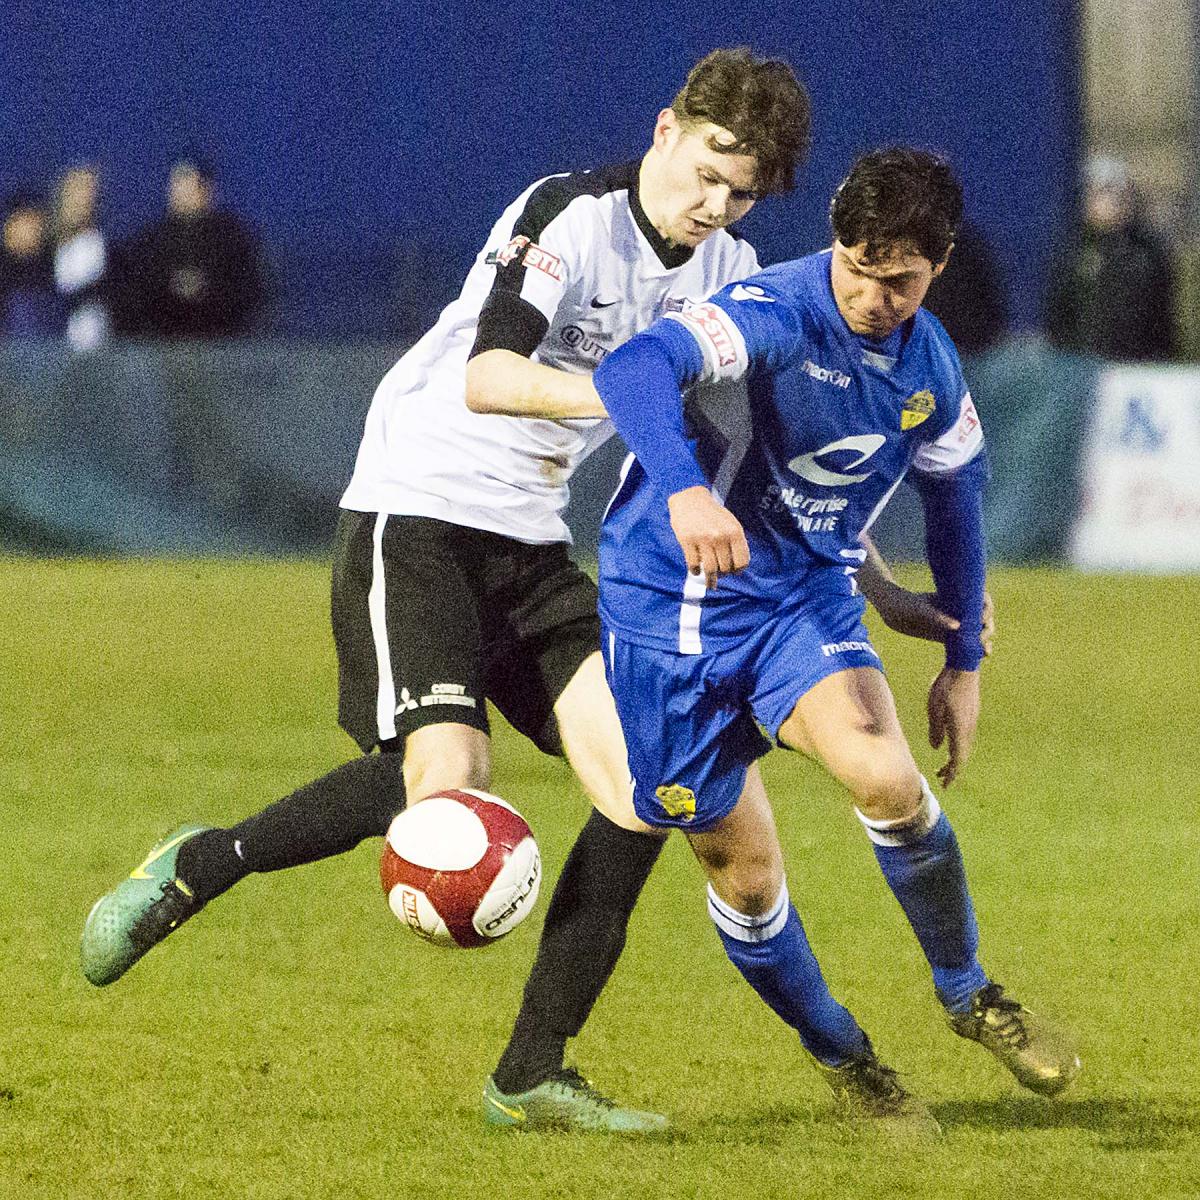 Action from the Evo-Stik League Premier Division clash at Steel Park on January 14, 2017. Pictures by John Hopkins